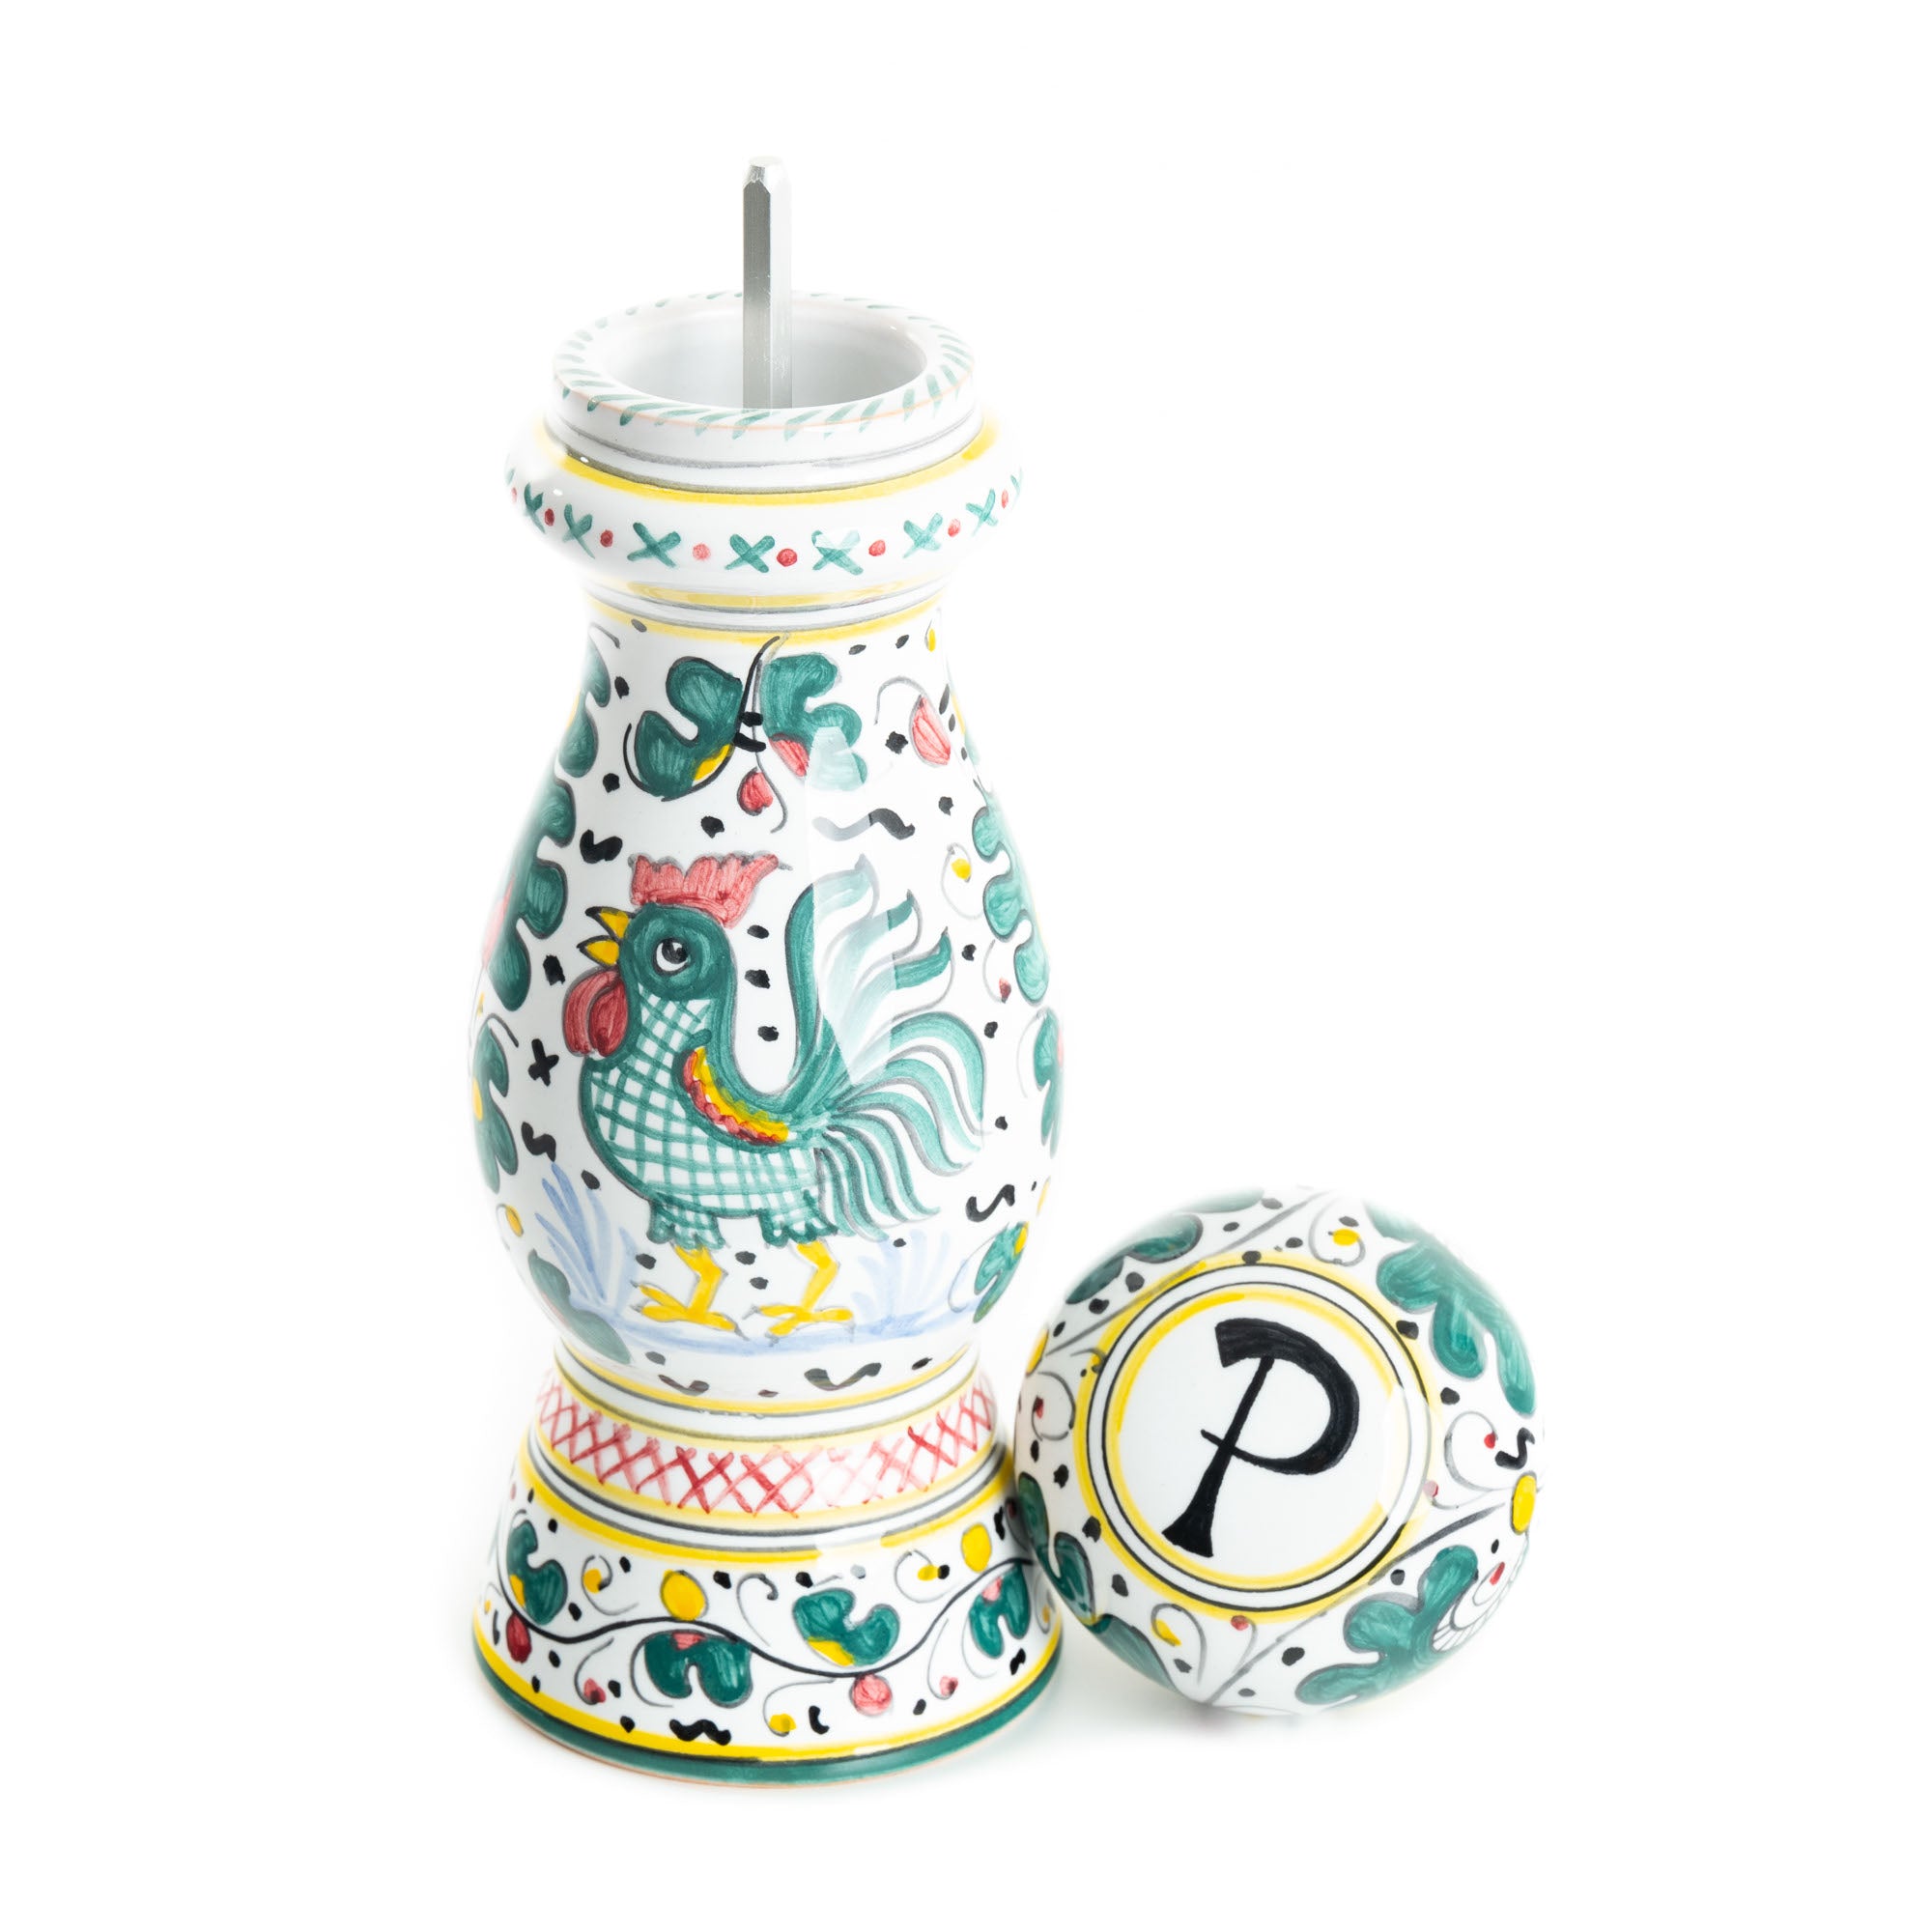 Orvieto - Pepper Grinder ,ceramics, pottery, italian design, majolica, handmade, handcrafted, handpainted, home decor, kitchen art, home goods, deruta, majolica, Artisan, treasures, traditional art, modern art, gift ideas, style, SF, shop small business, artists, shop online, landmark store, legacy, one of a kind, limited edition, gift guide, gift shop, retail shop, decorations, shopping, italy, home staging, home decorating, home interiors